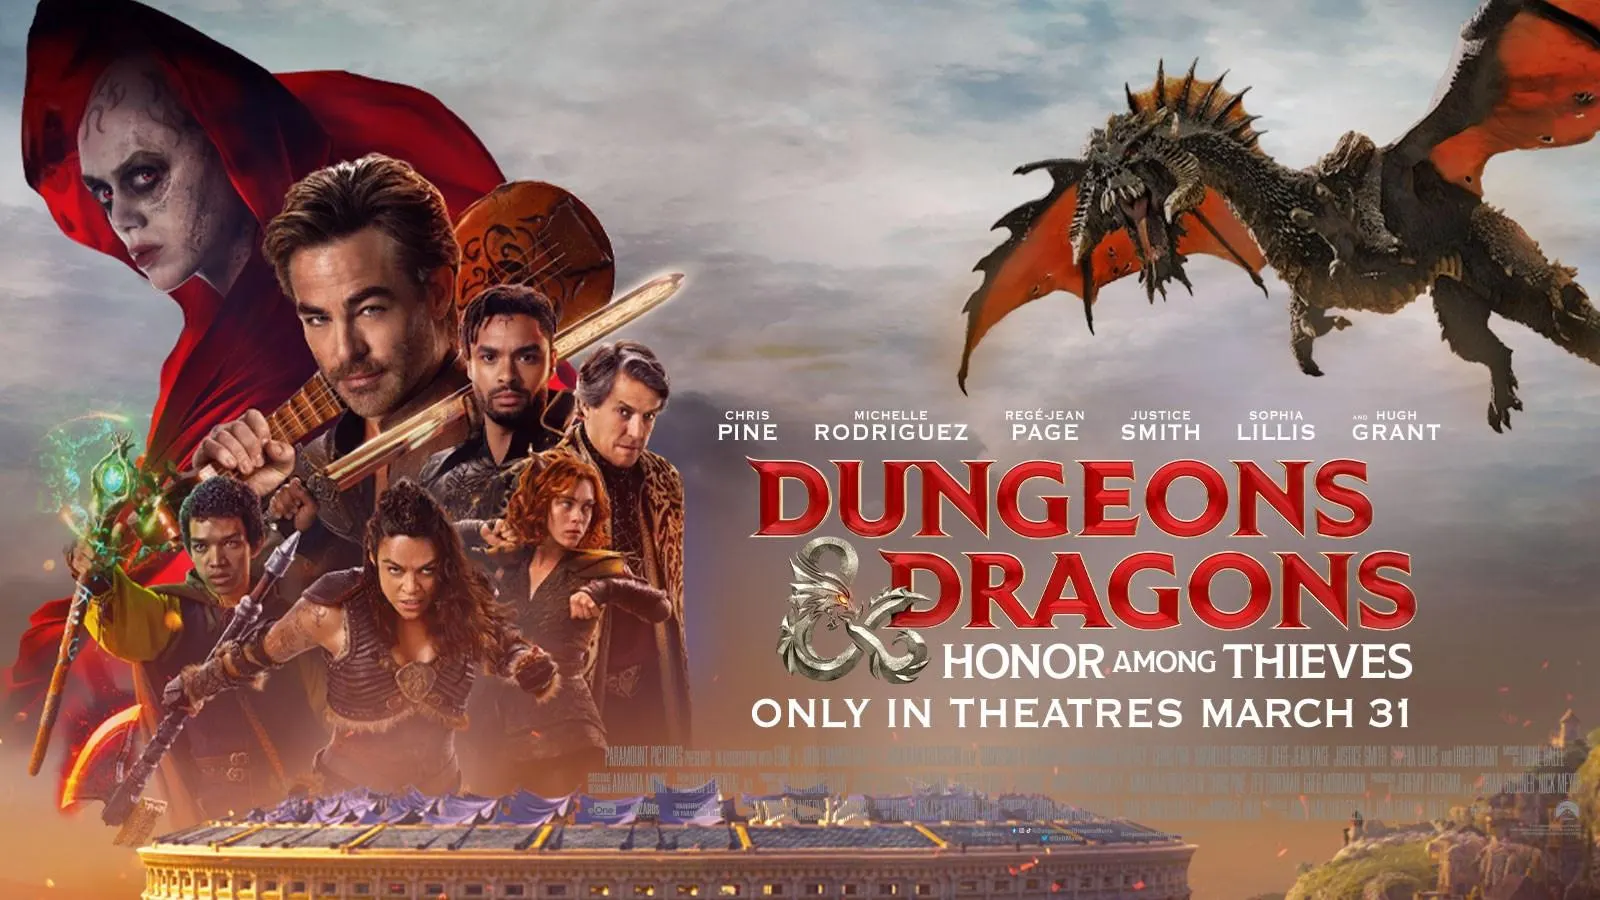 Exciting Peek into 2026 Chris Pine Set to Star in Anticipated 'Dungeons & Dragons 2' Adventure